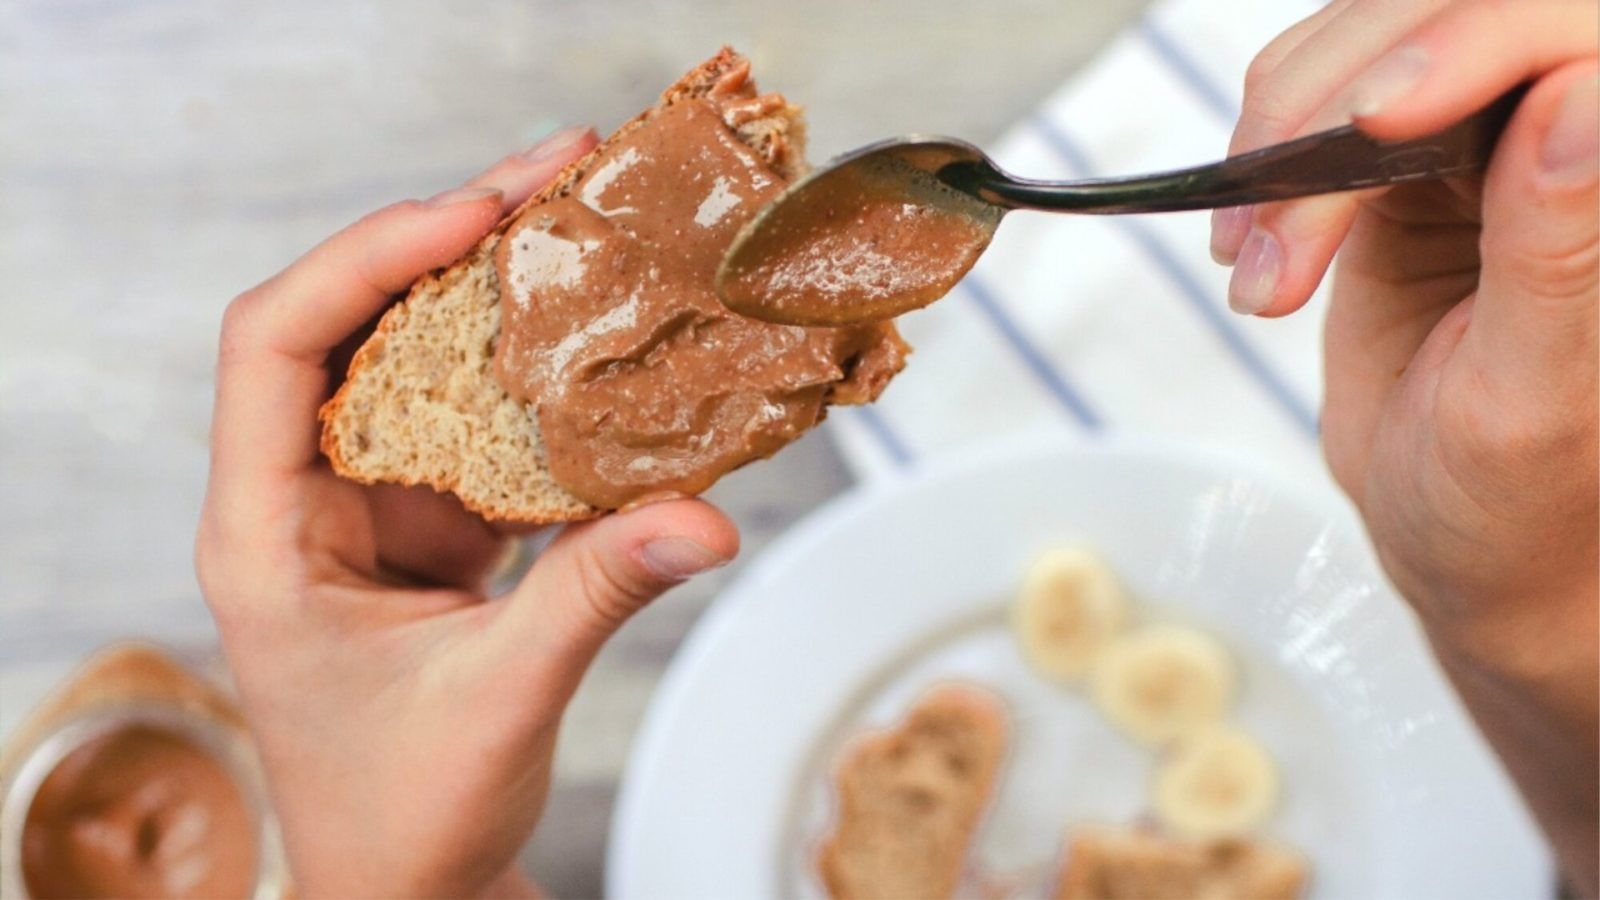 The 5 most mouthwatering nut butter alternatives, according to nutritionists